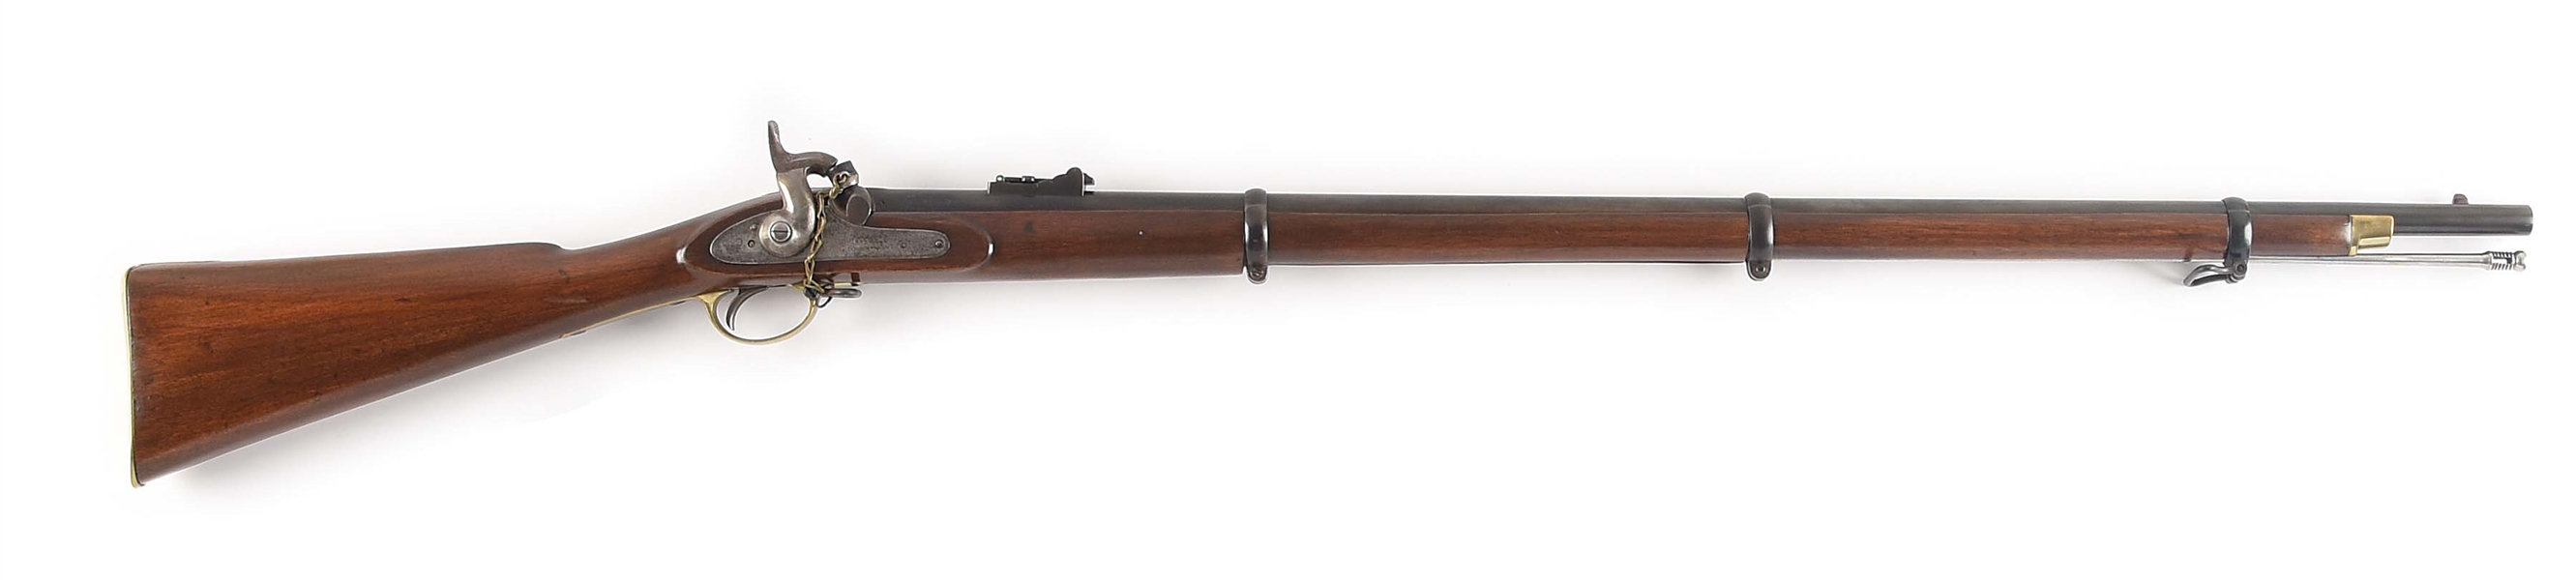 (A) CIVIL WAR 1862 ENFIELD MUSKET WITH CONFEDERATE VIEWERS MARKS.